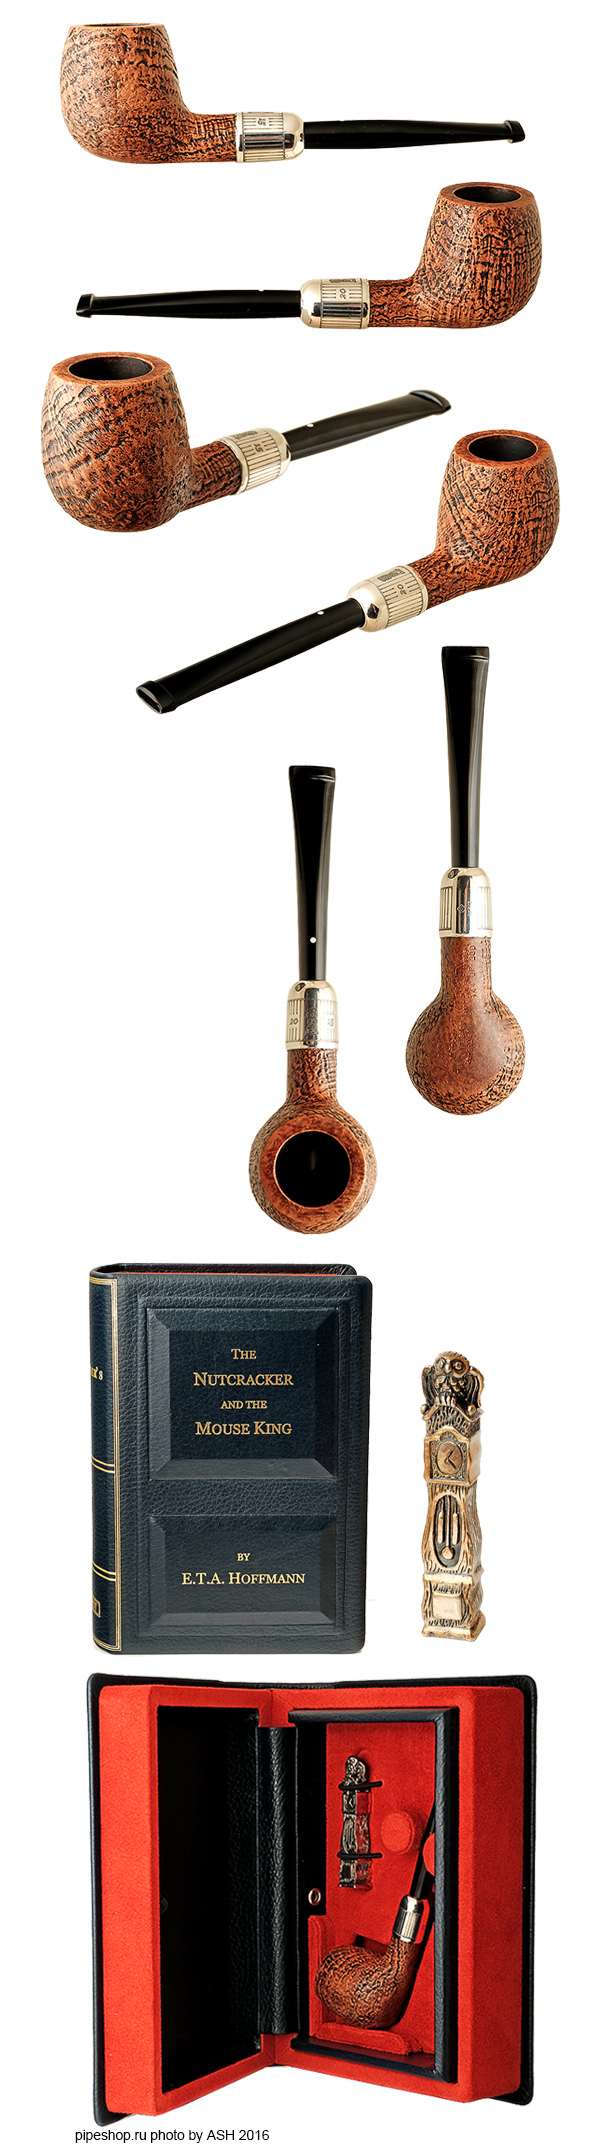   ALFRED DUNHILL`S THE WHITE SPOT CHRISTMAS PIPE 2015 144/300